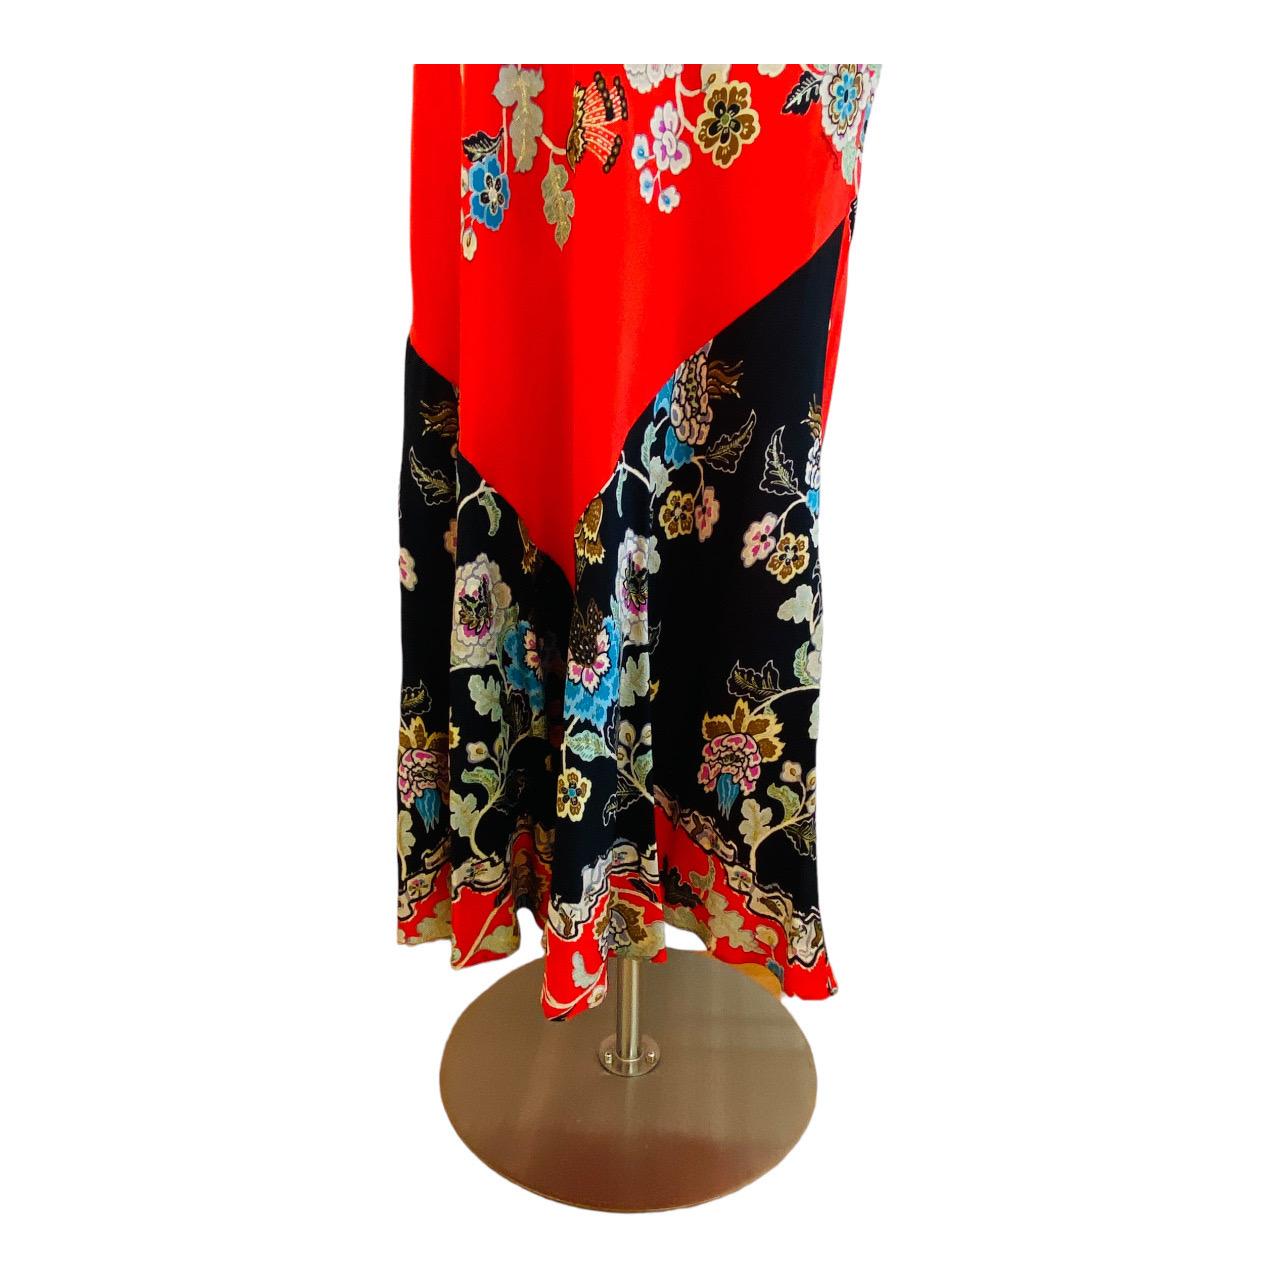 Vintage Roberto Cavalli S/S 2003 Chinoiserie Black + Red Floral Maxi Skirt For Sale 4